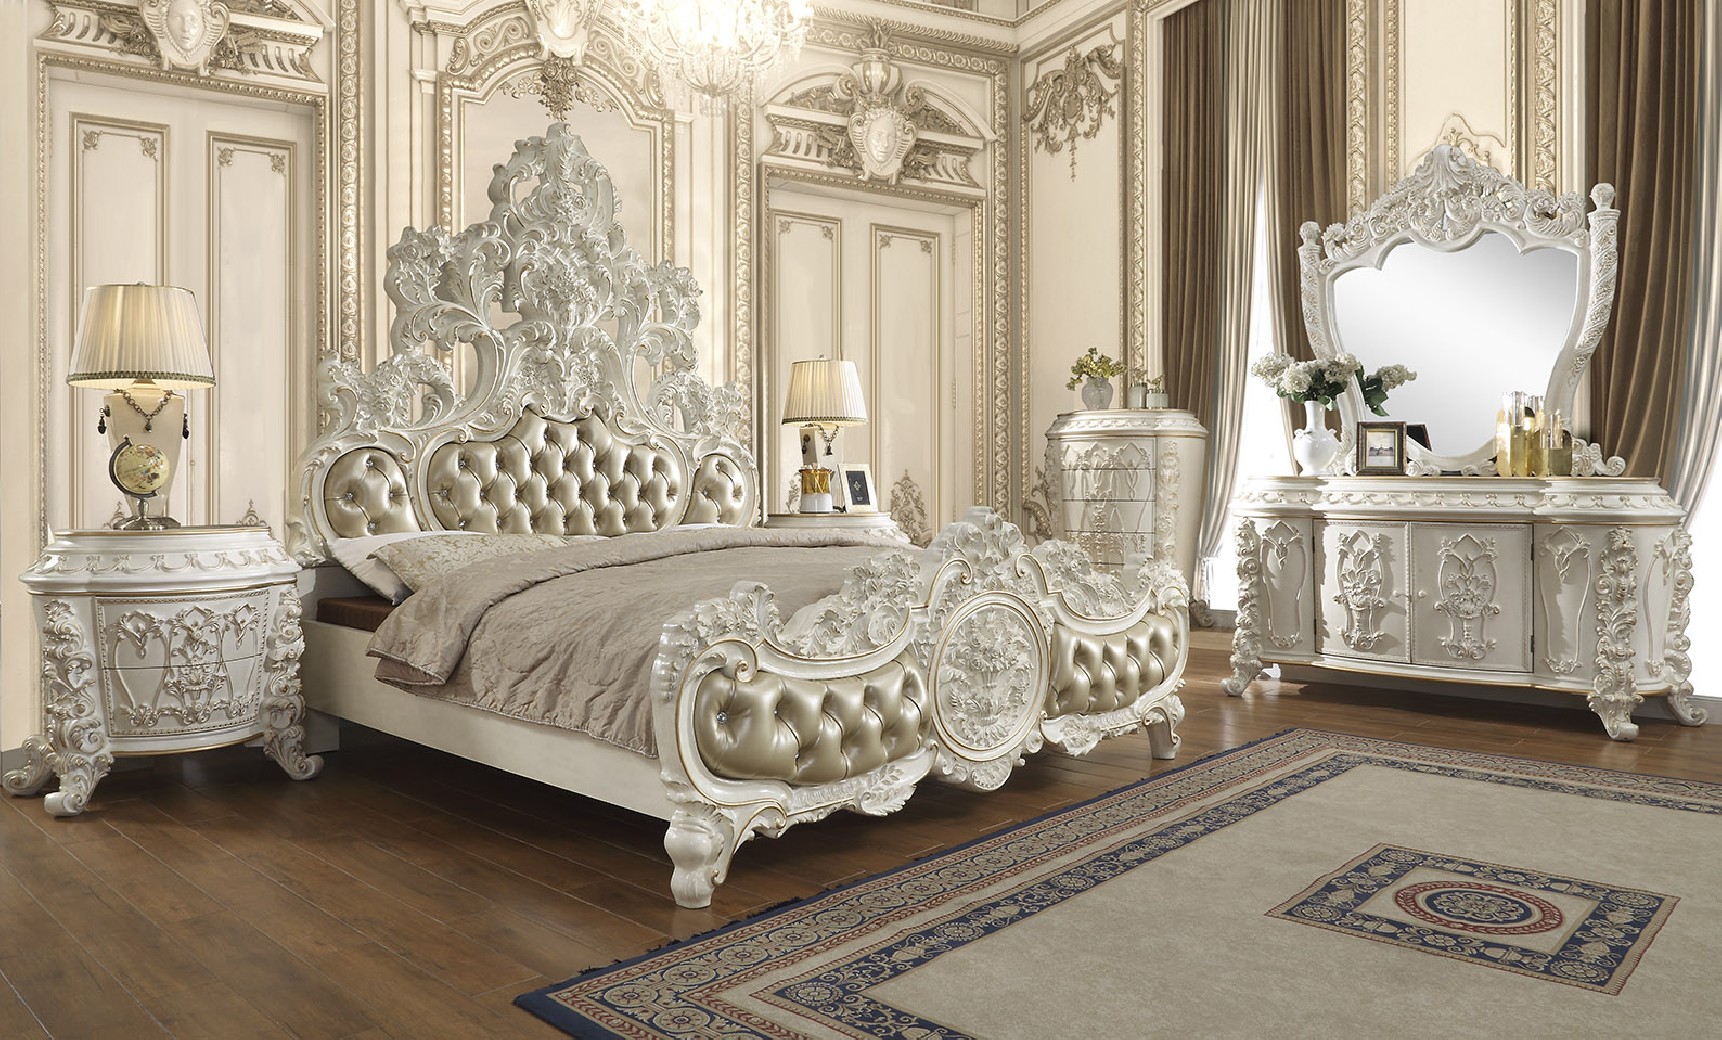 Hd 1806 Homey Design Bed Victorian, Victorian King Bed